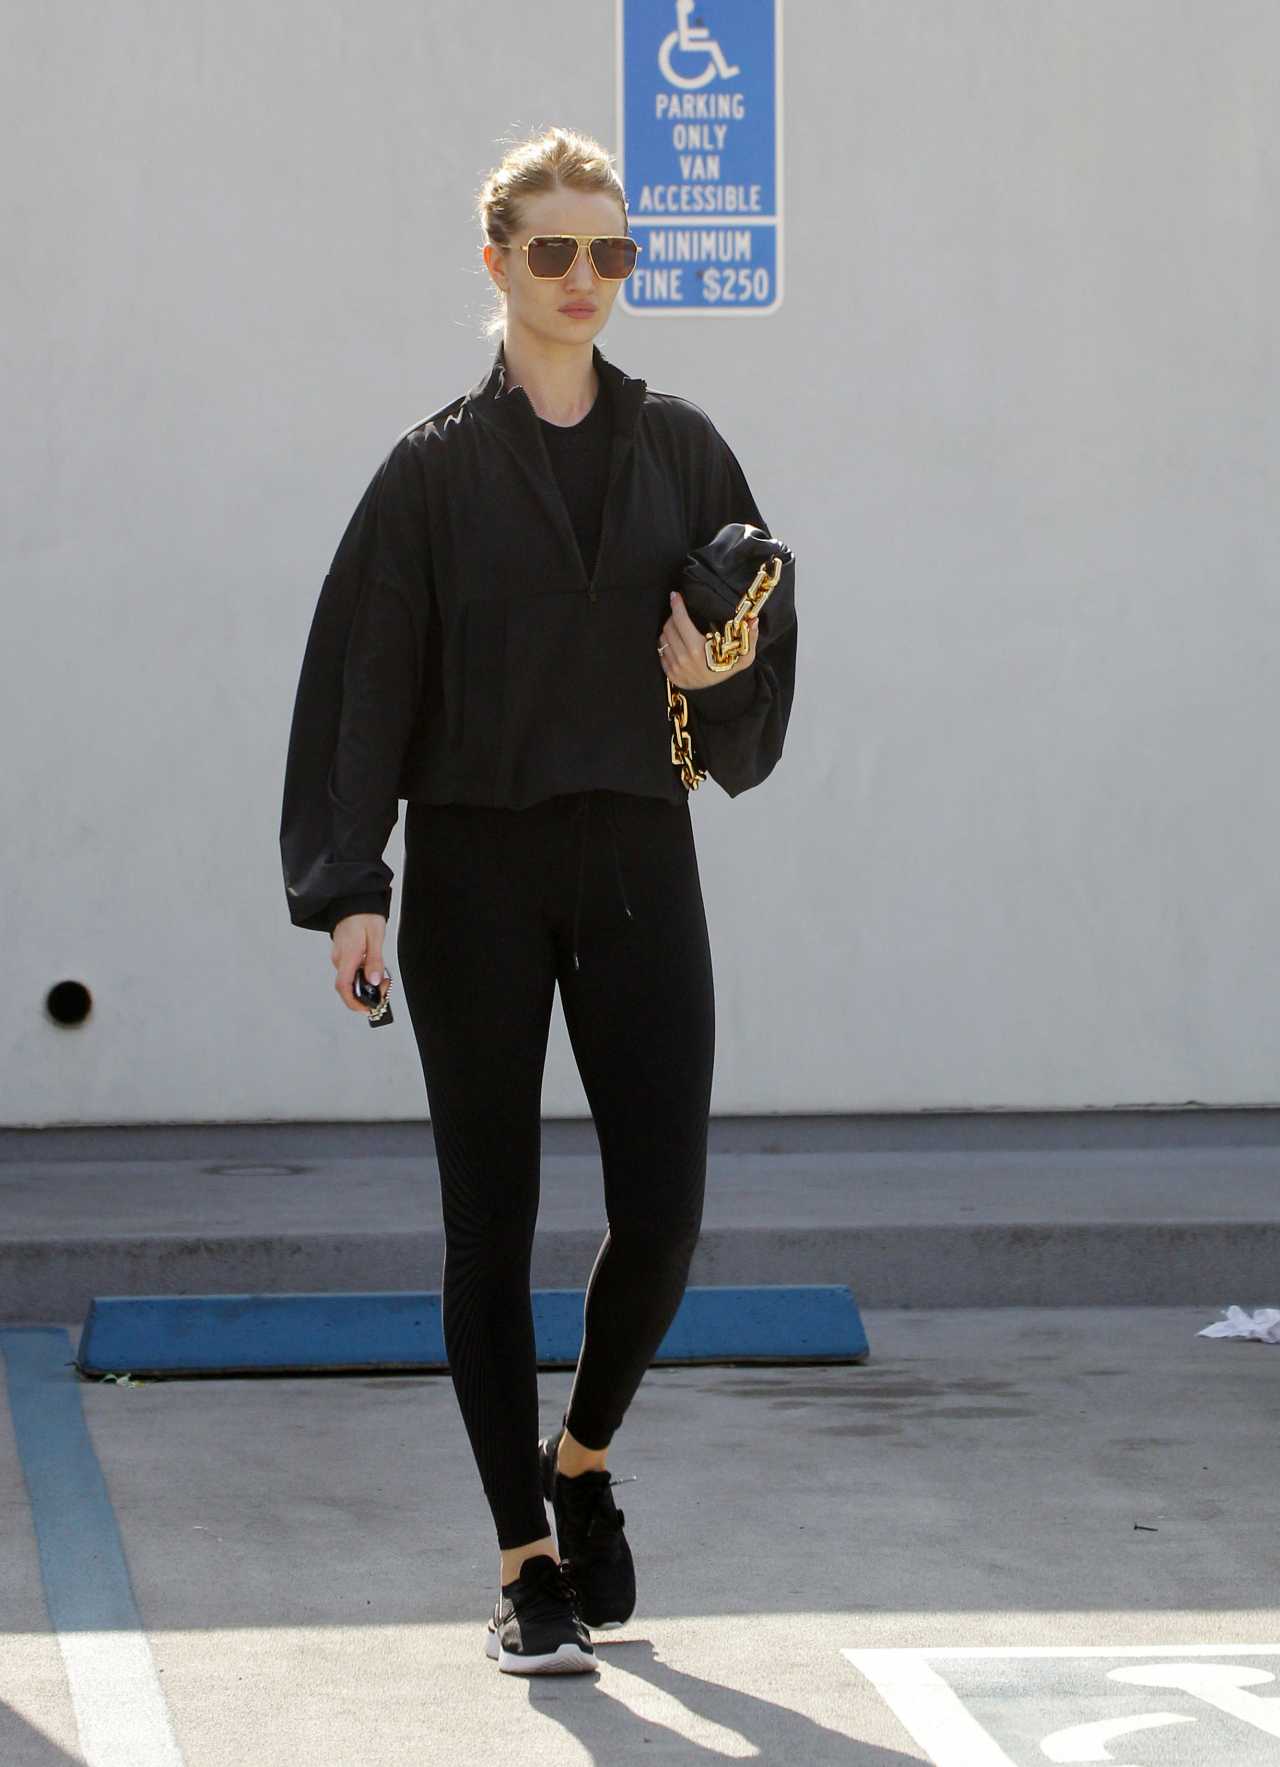 Rosie Huntington-Whiteley 2020 : Rosie Huntington-Whiteley – Exiting a Gym After A Workout in Los Angeles-05